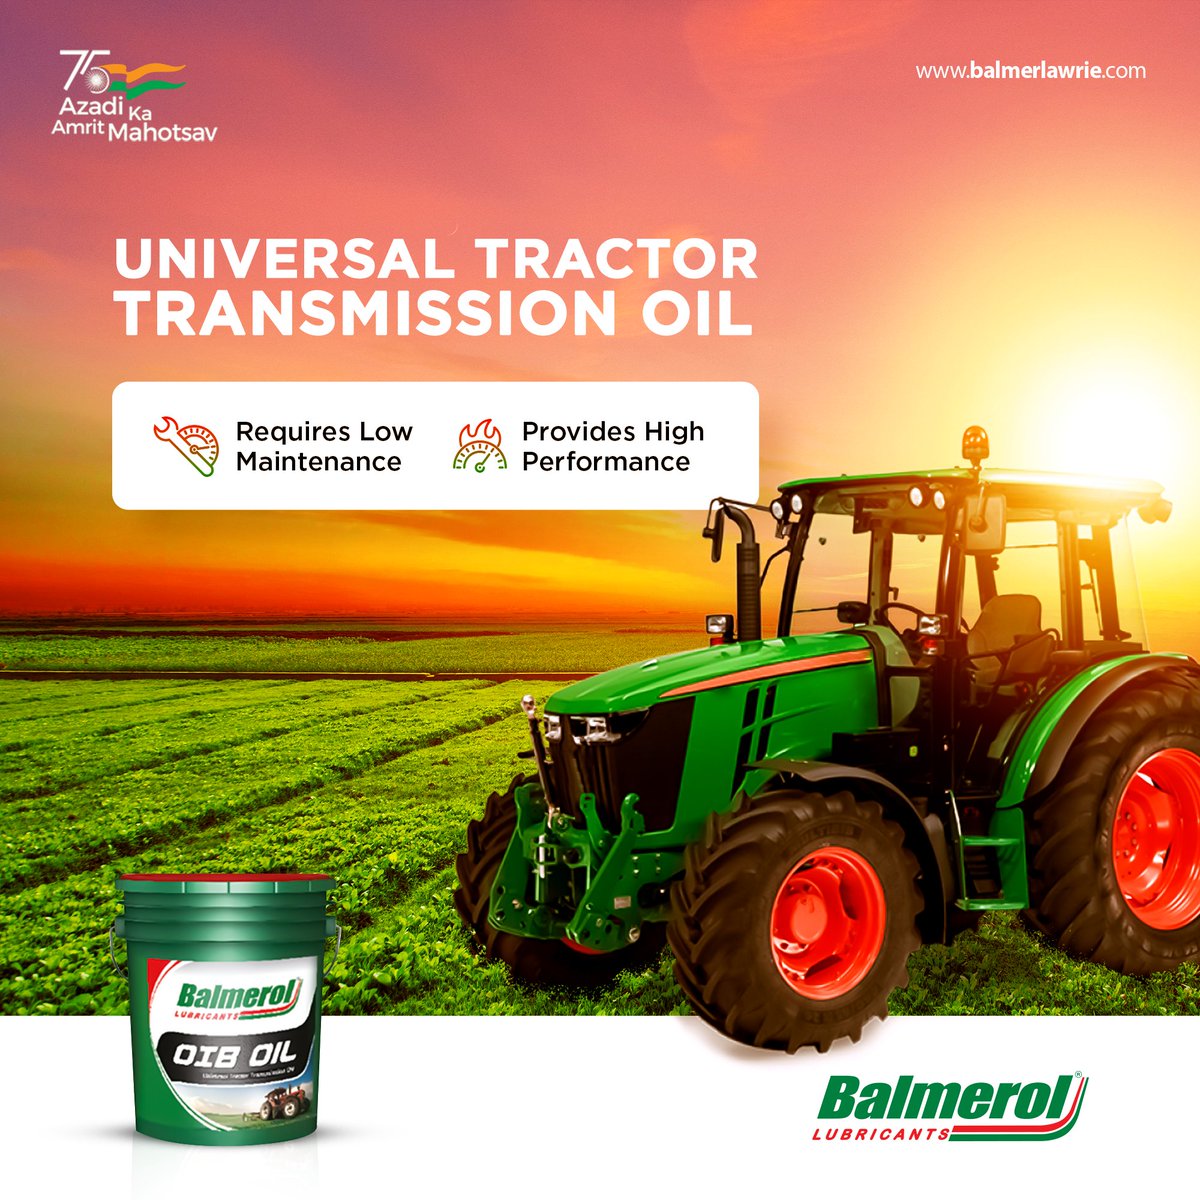 Balmerol’s OIB oil is manufactured to meet all the requirements of your wet brake discs. It enables smooth movement due to its superior lubrication properties.

#balmerol #balmerandlawrie #engineoils #tractors #transmissionoil #oib